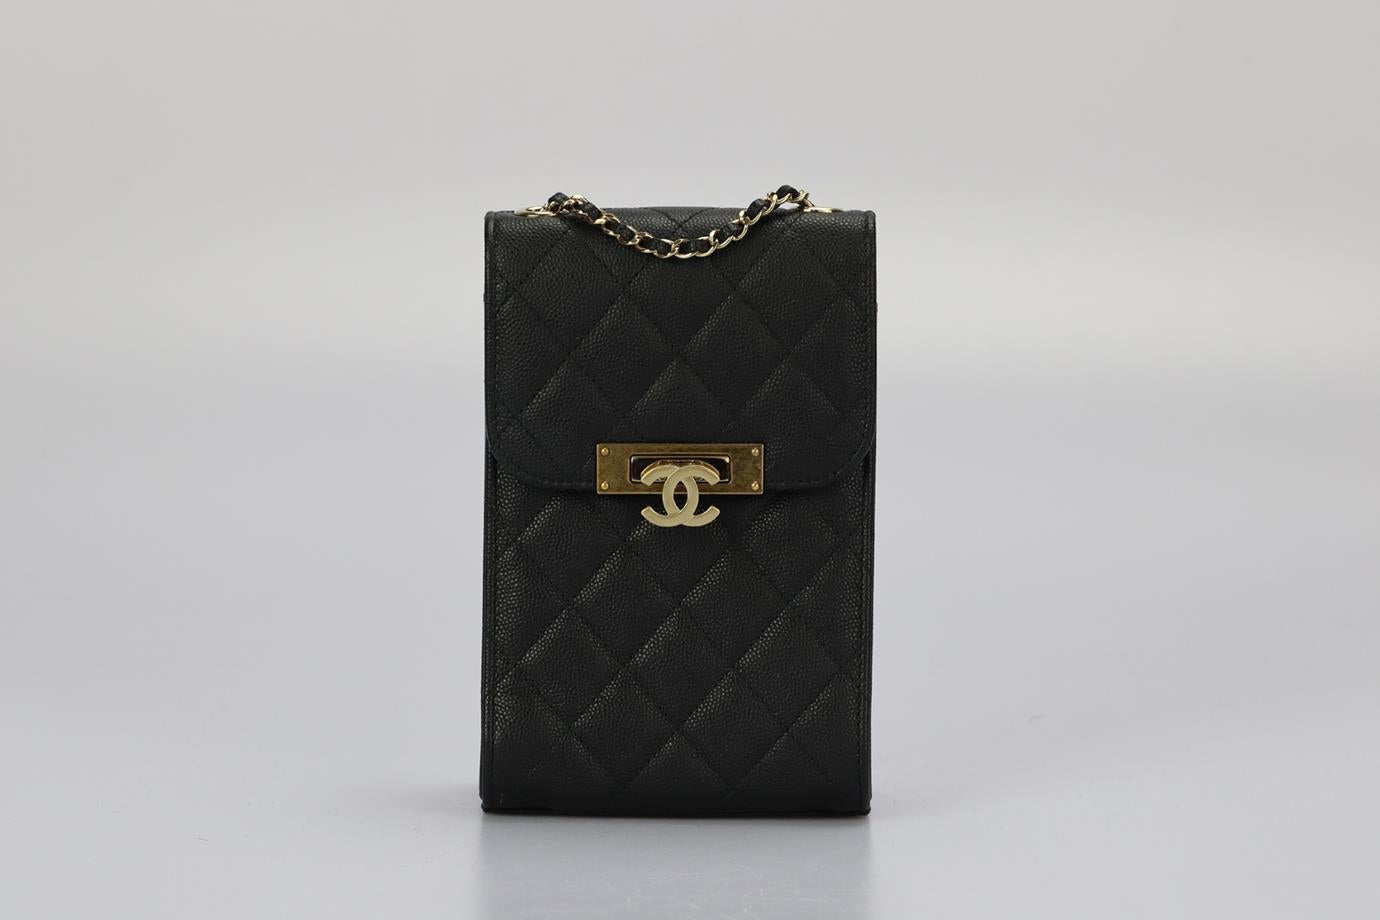 Chanel 2016 Golden Class Phone Holder Quilted Caviar Leather Shoulder Bag. Black. Lock fastening - Front. Comes with - authenticity card. Does not come with - dustbag or box. Height: 6.8 in. Width: 4.4 in. Depth: 2.6 in. Strap drop: 22.5 in.